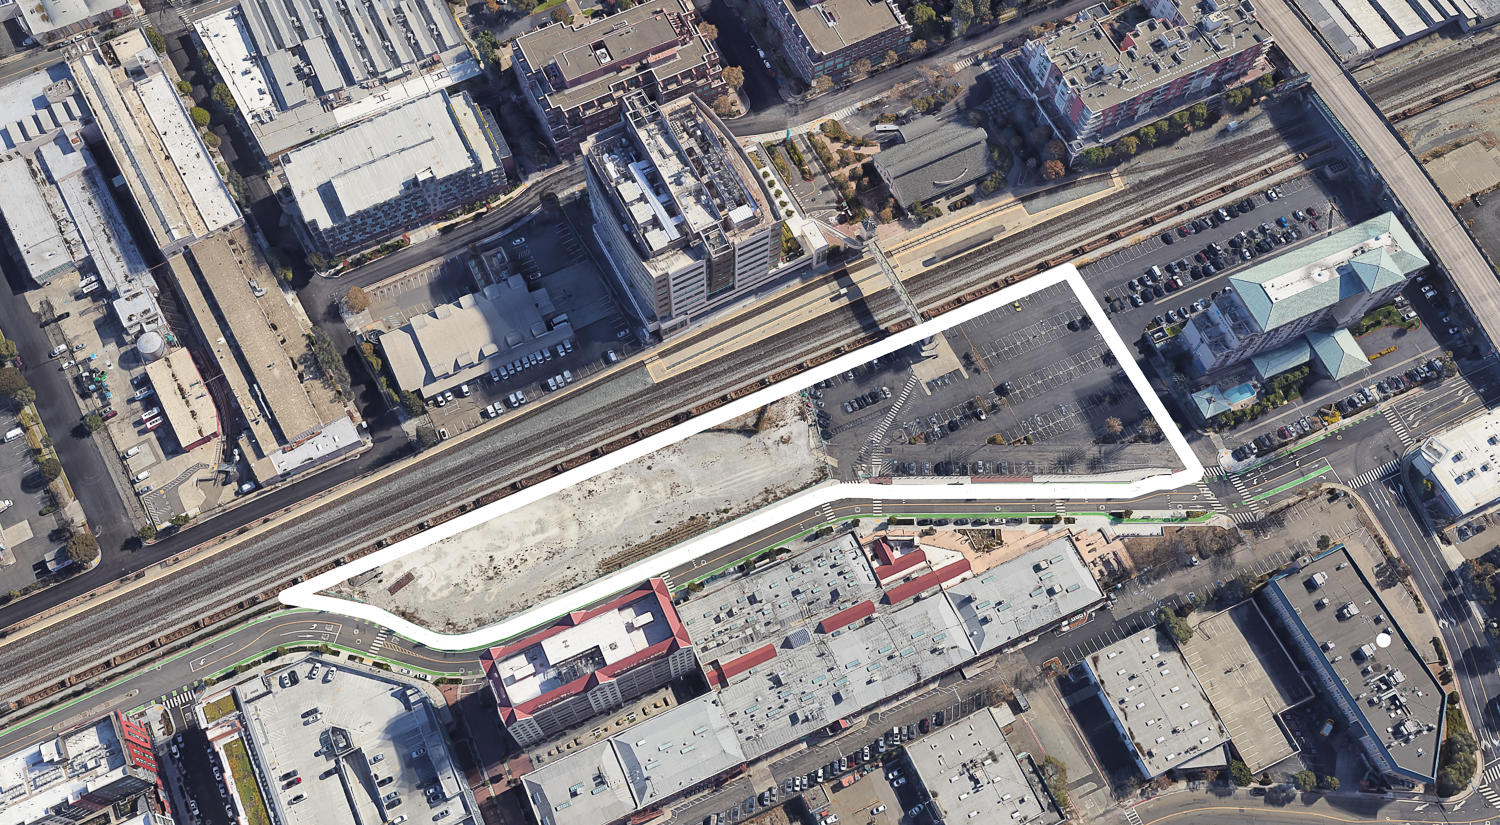 Emeryville Public Market Parcel A and B outlined by SFYIMBY, image via Google Satellite